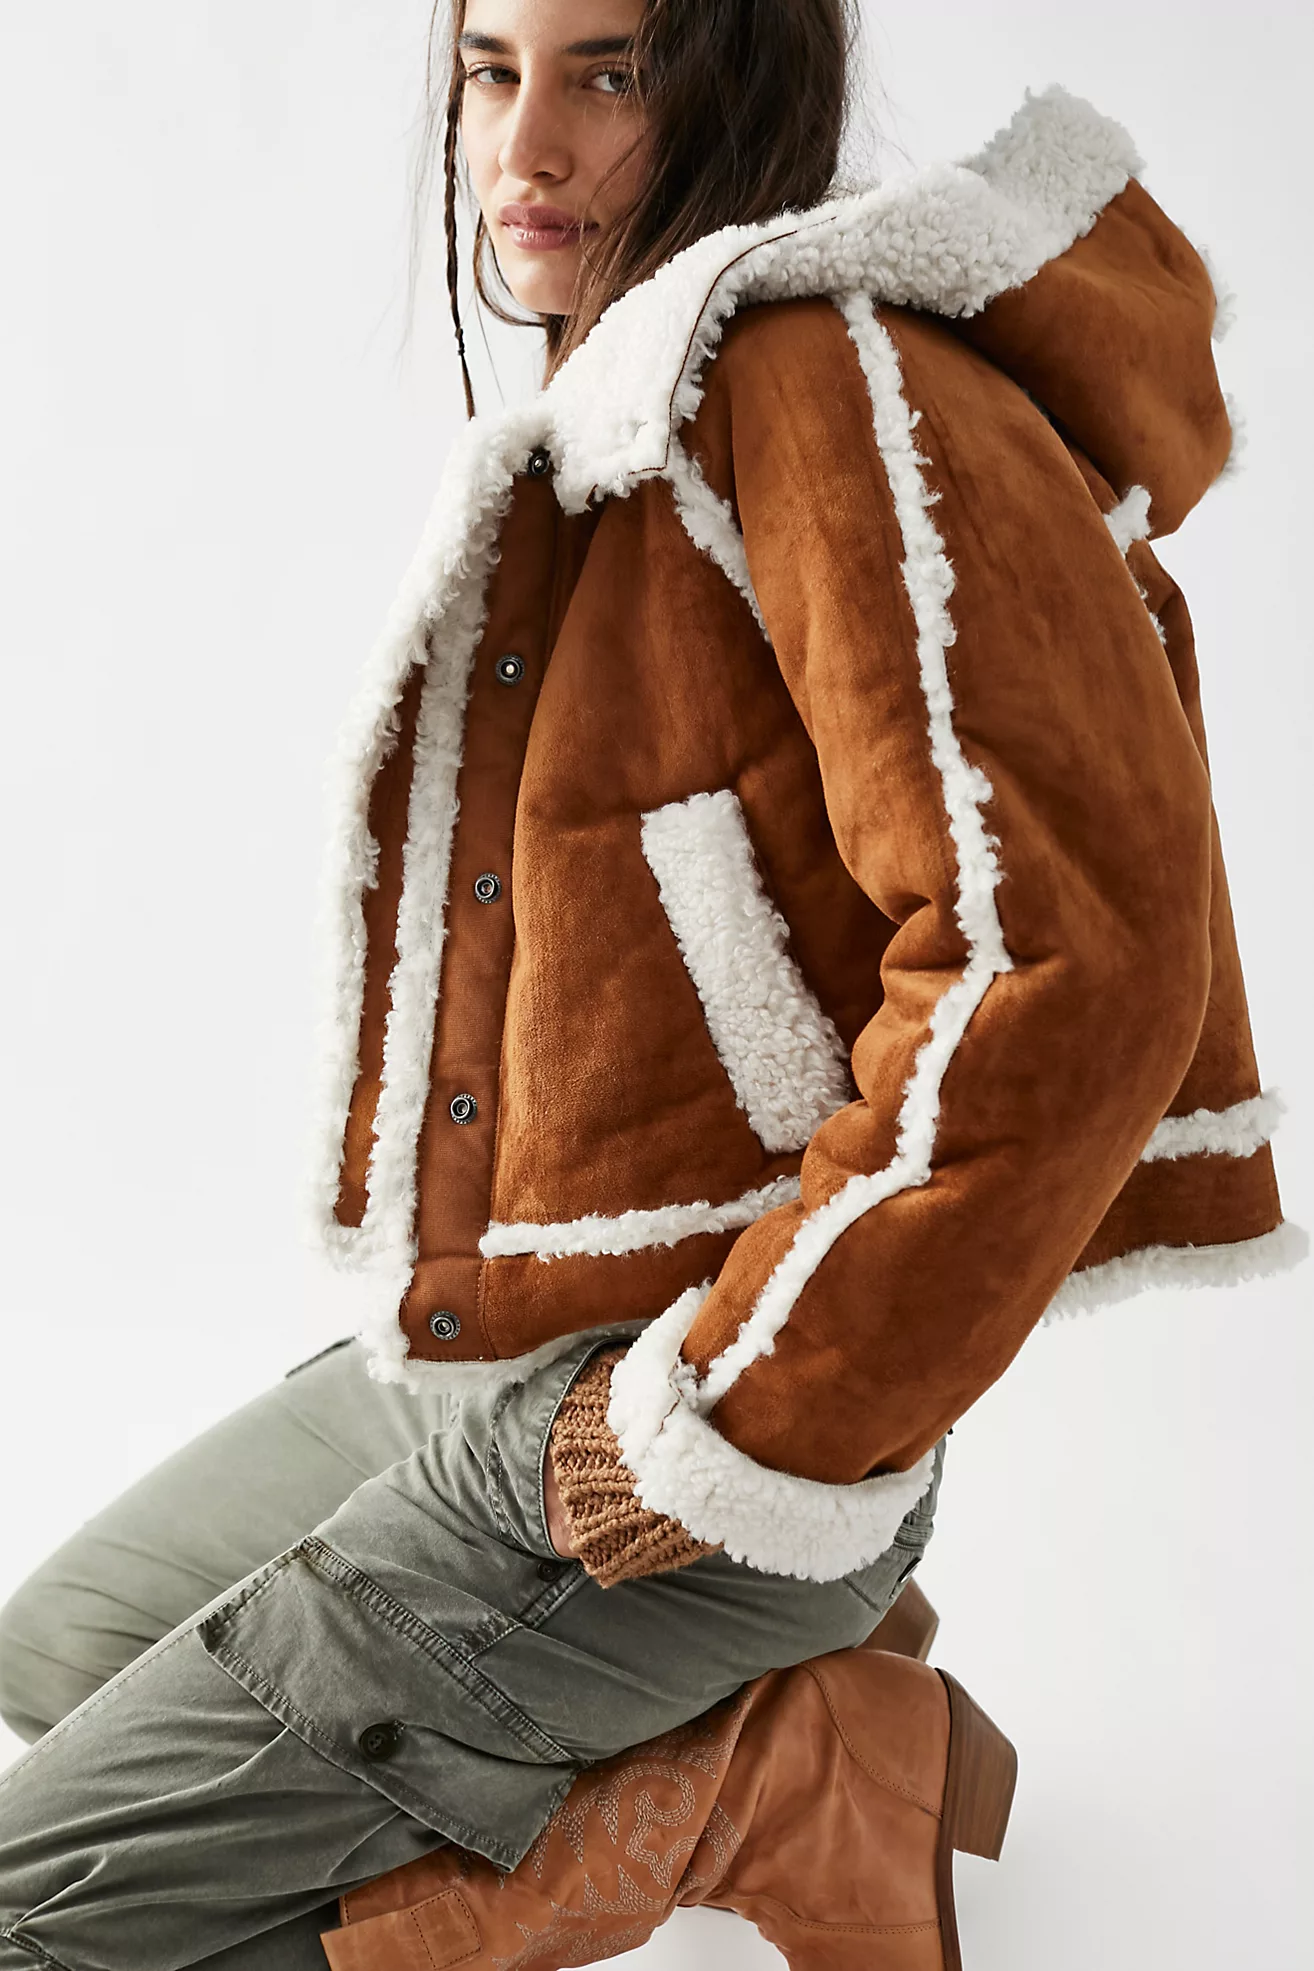 The Best Companion to Denim Next Fall? Shearling Coats – Sourcing